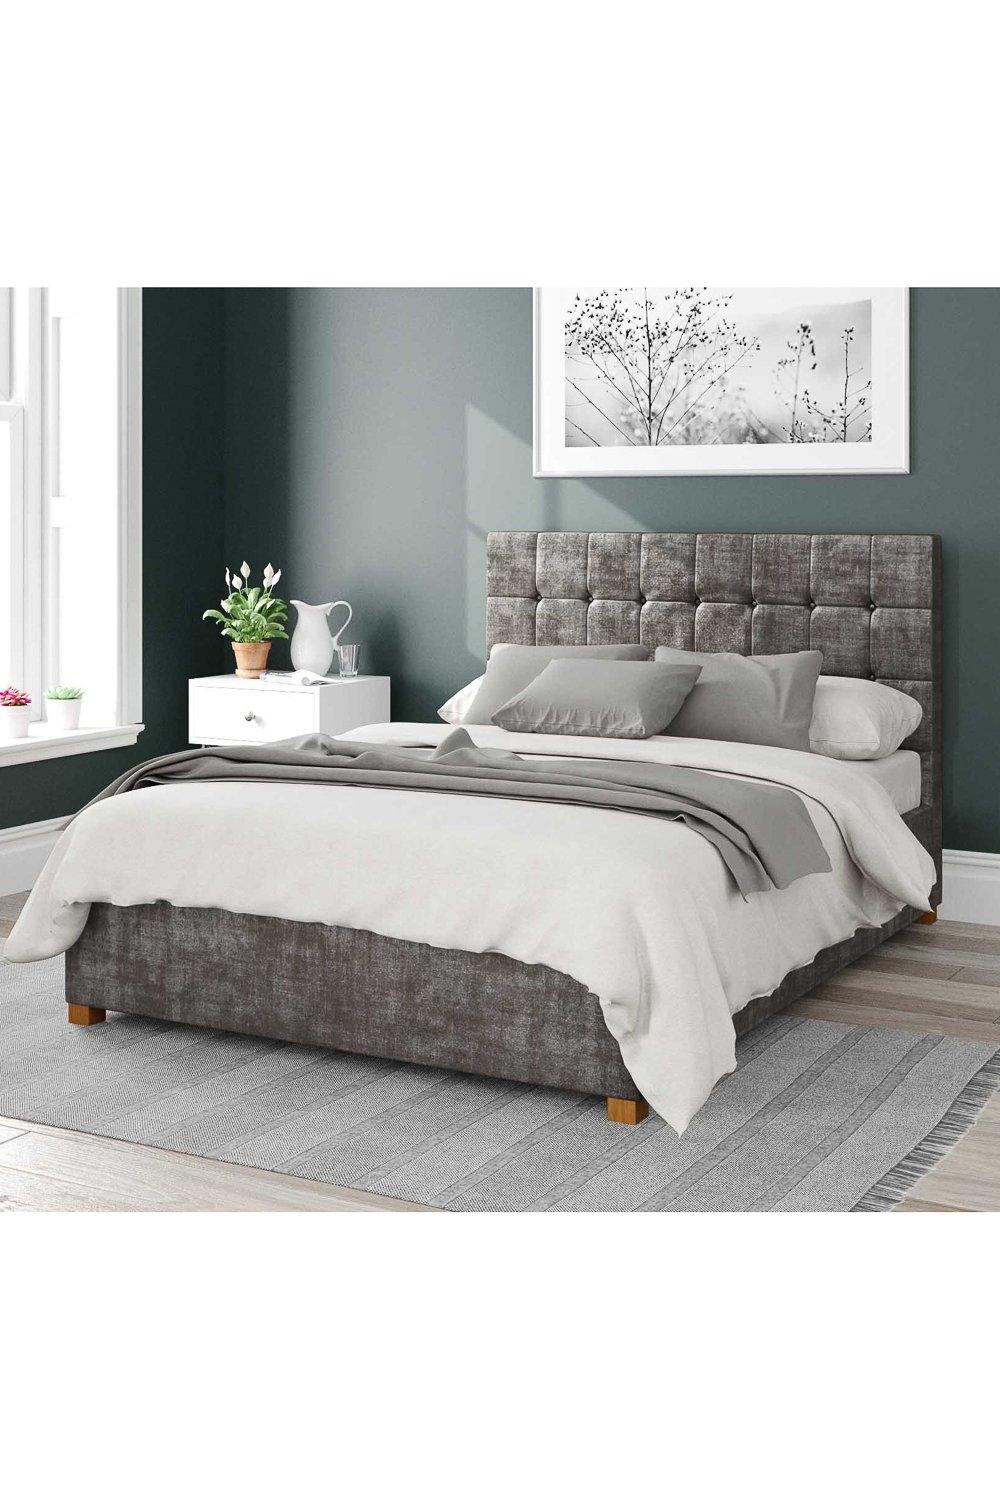 Sinatra Upholstered Ottoman Storage Bed, Distressed Velvet Fabric